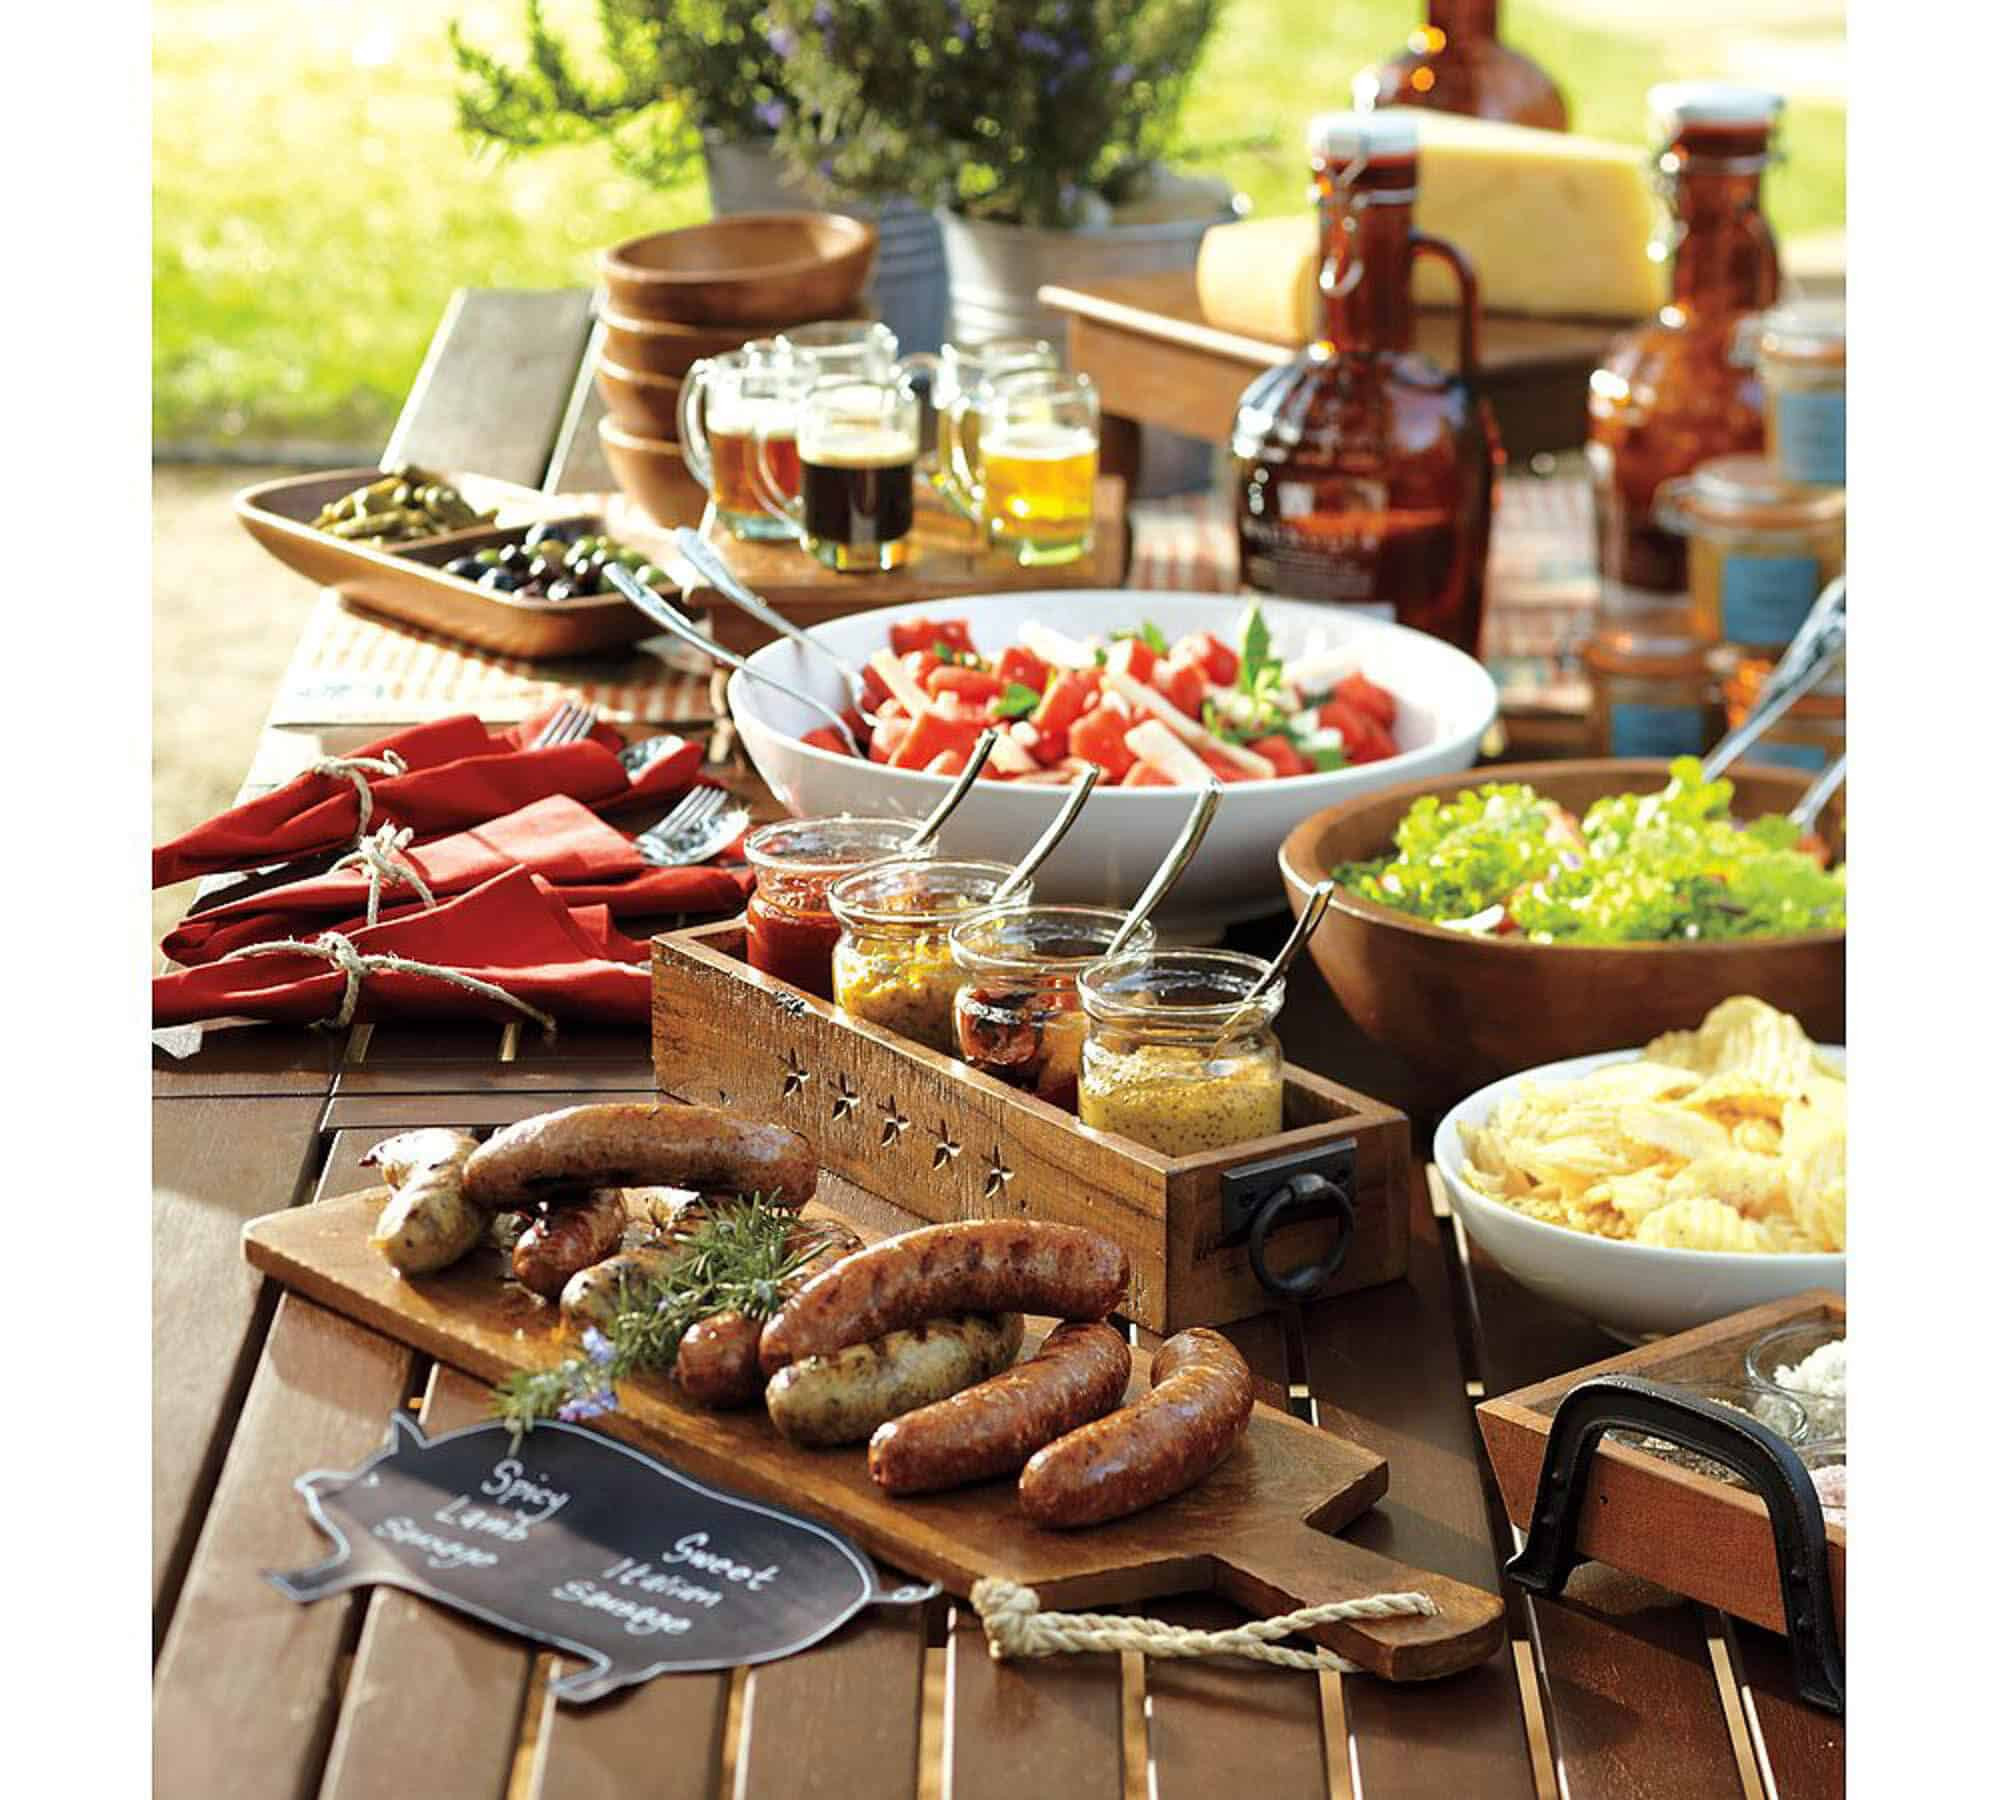 Food Ideas For Backyard Party
 How to Host a Backyard Party & BBQ — Gentleman s Gazette